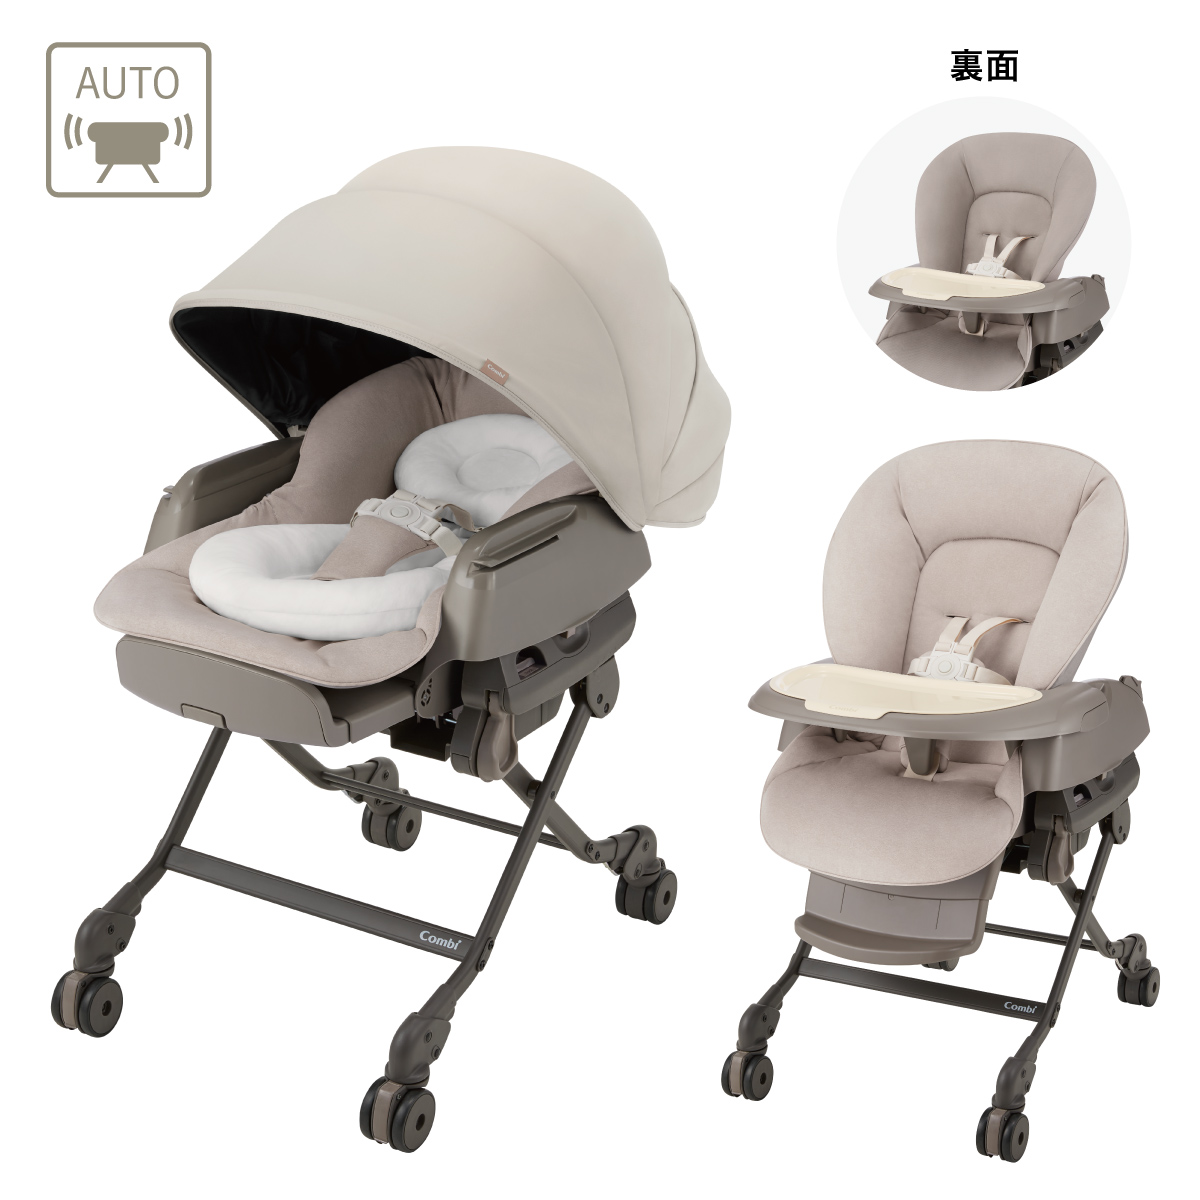  baby hammock-chair high low bed high low rack high low chair electric swing white lable Nemulila cordless AUTO SWING BEDi Long SS EG+ beige 